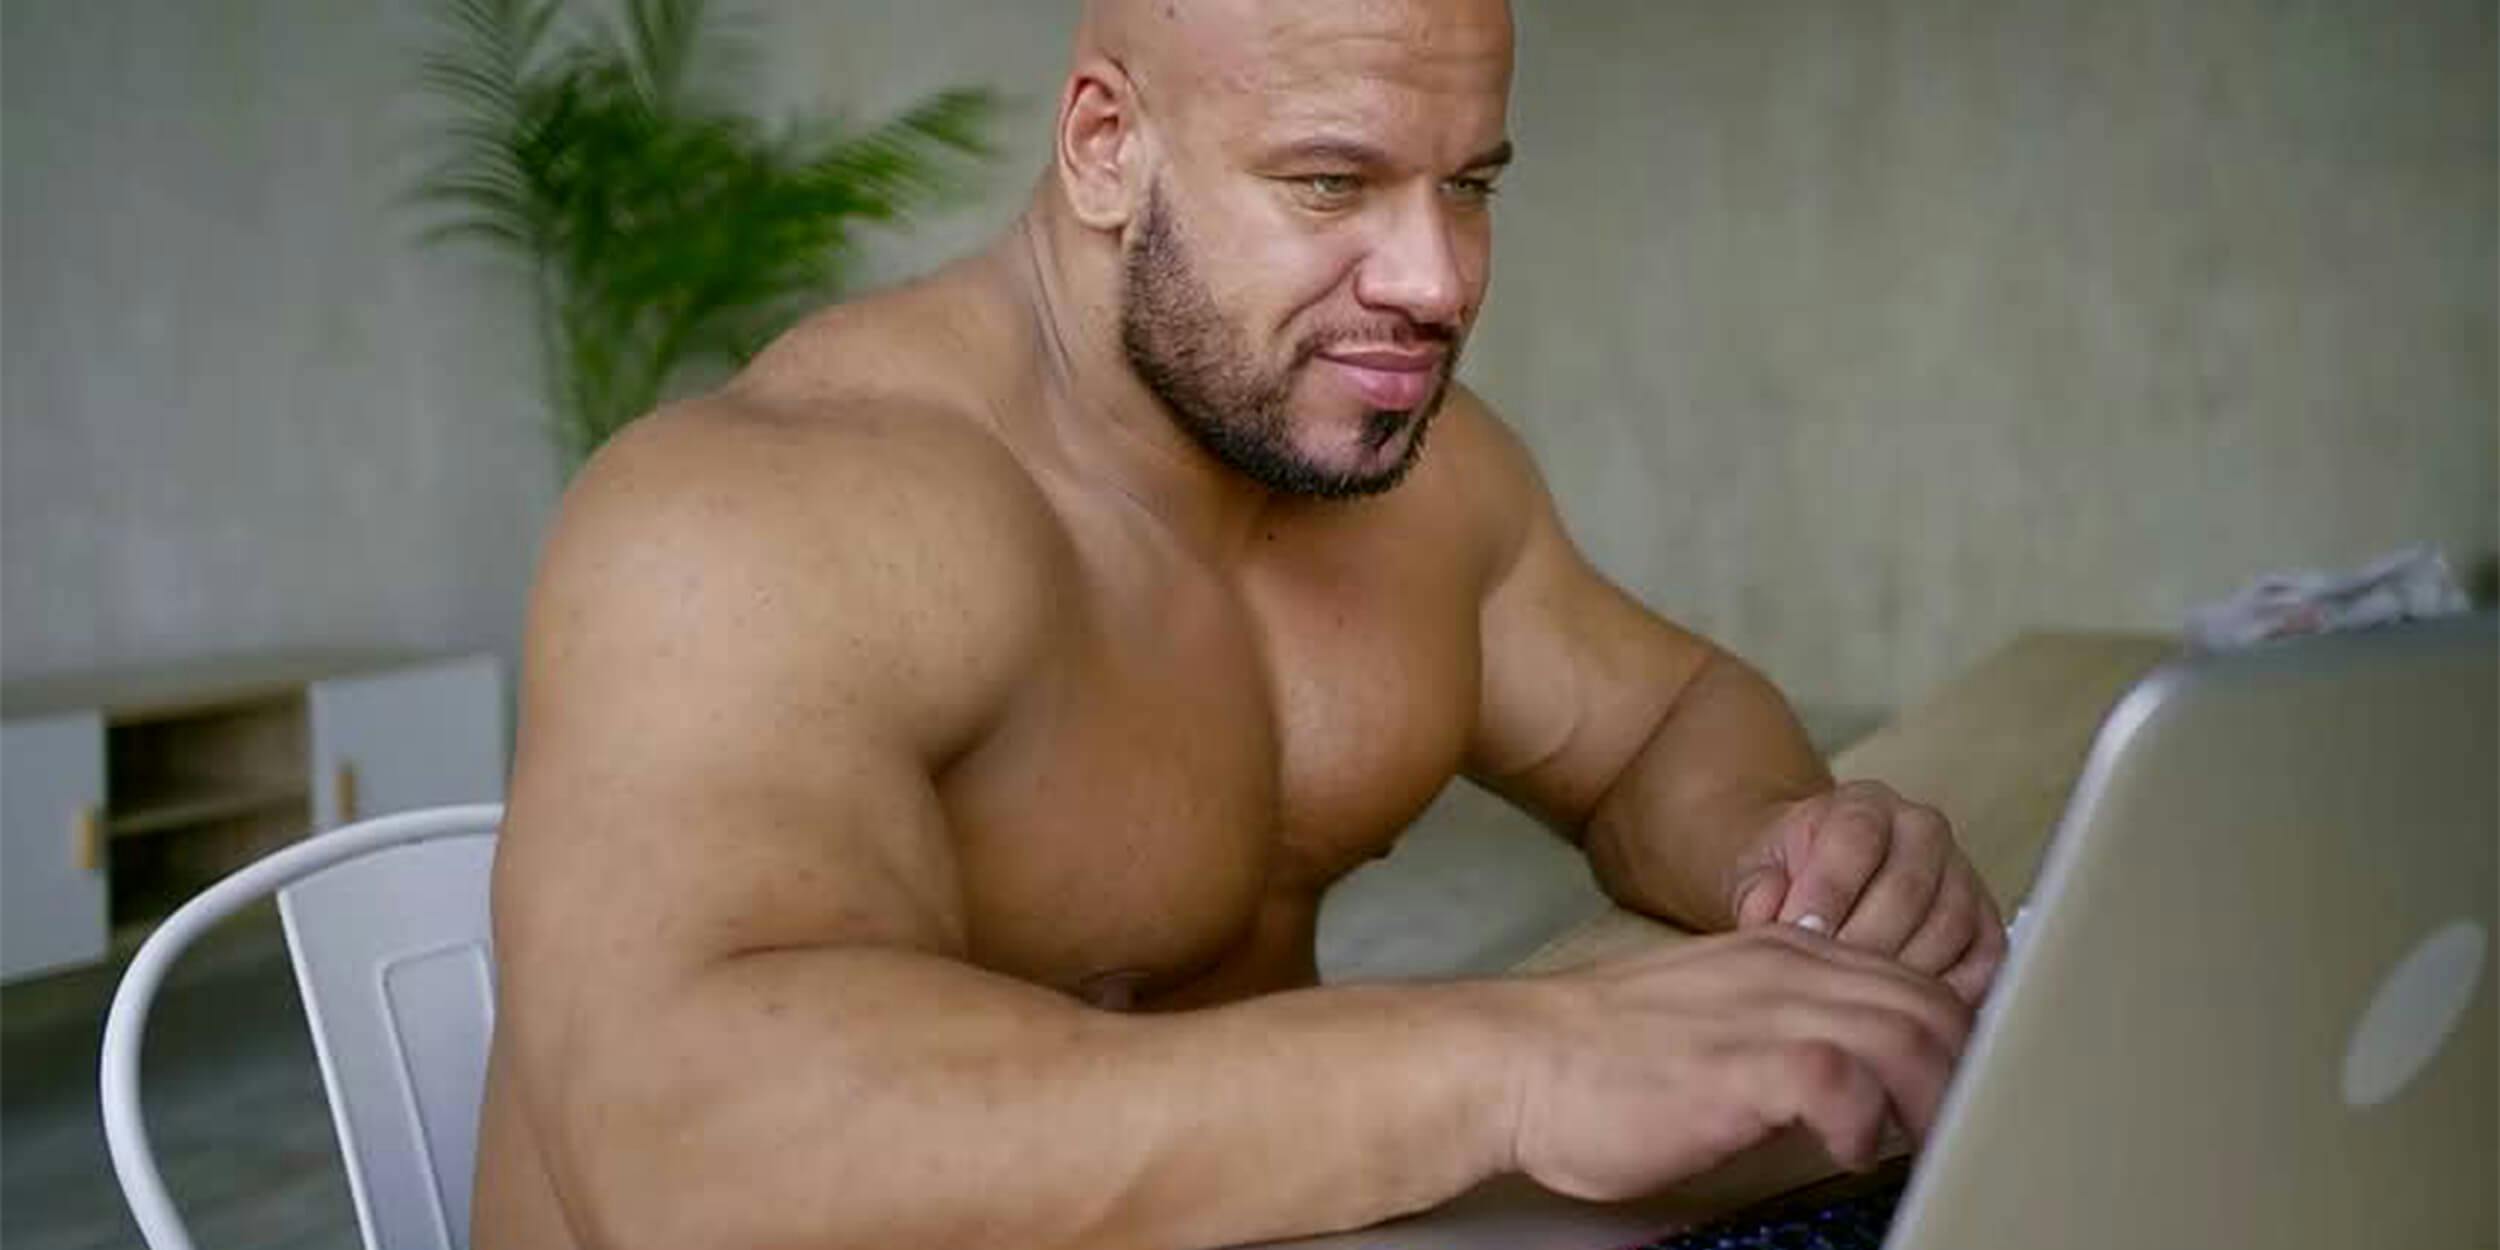 The 'buff guys on laptops' meme is here to offer some wholesome a...